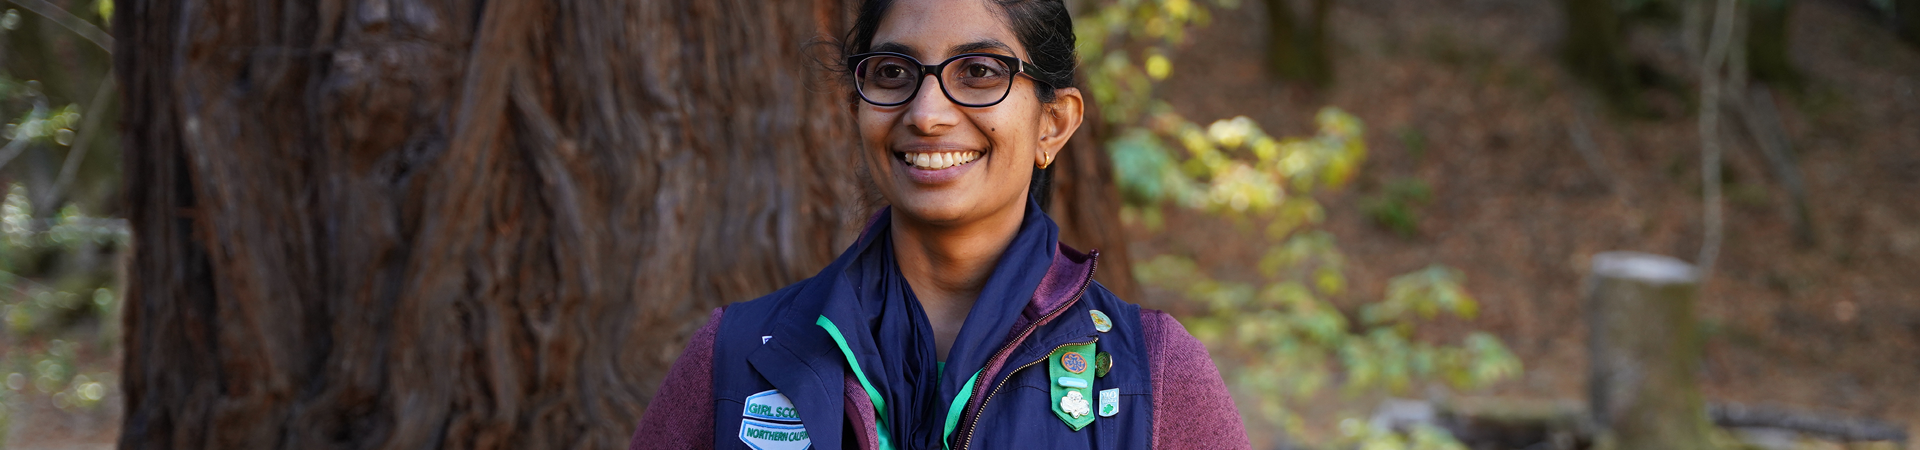  adult woman volunteer in vest outside hiking and smiling 